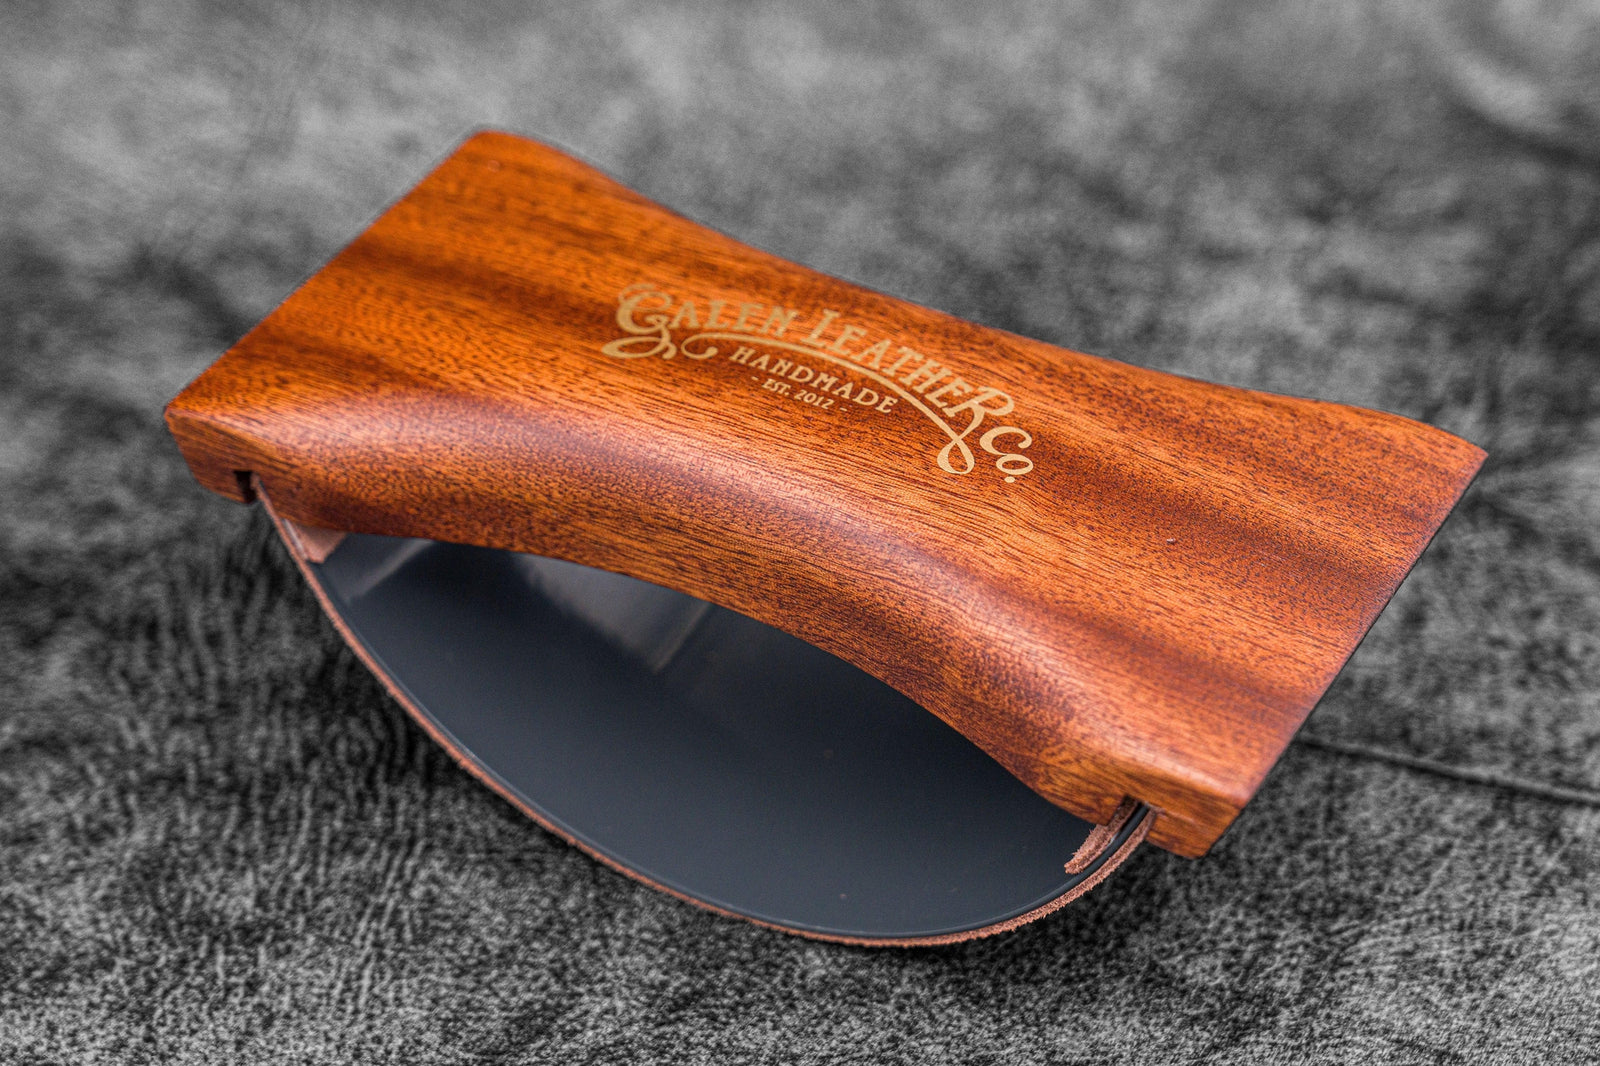 Taccia Roughna Ink - Woody Brown